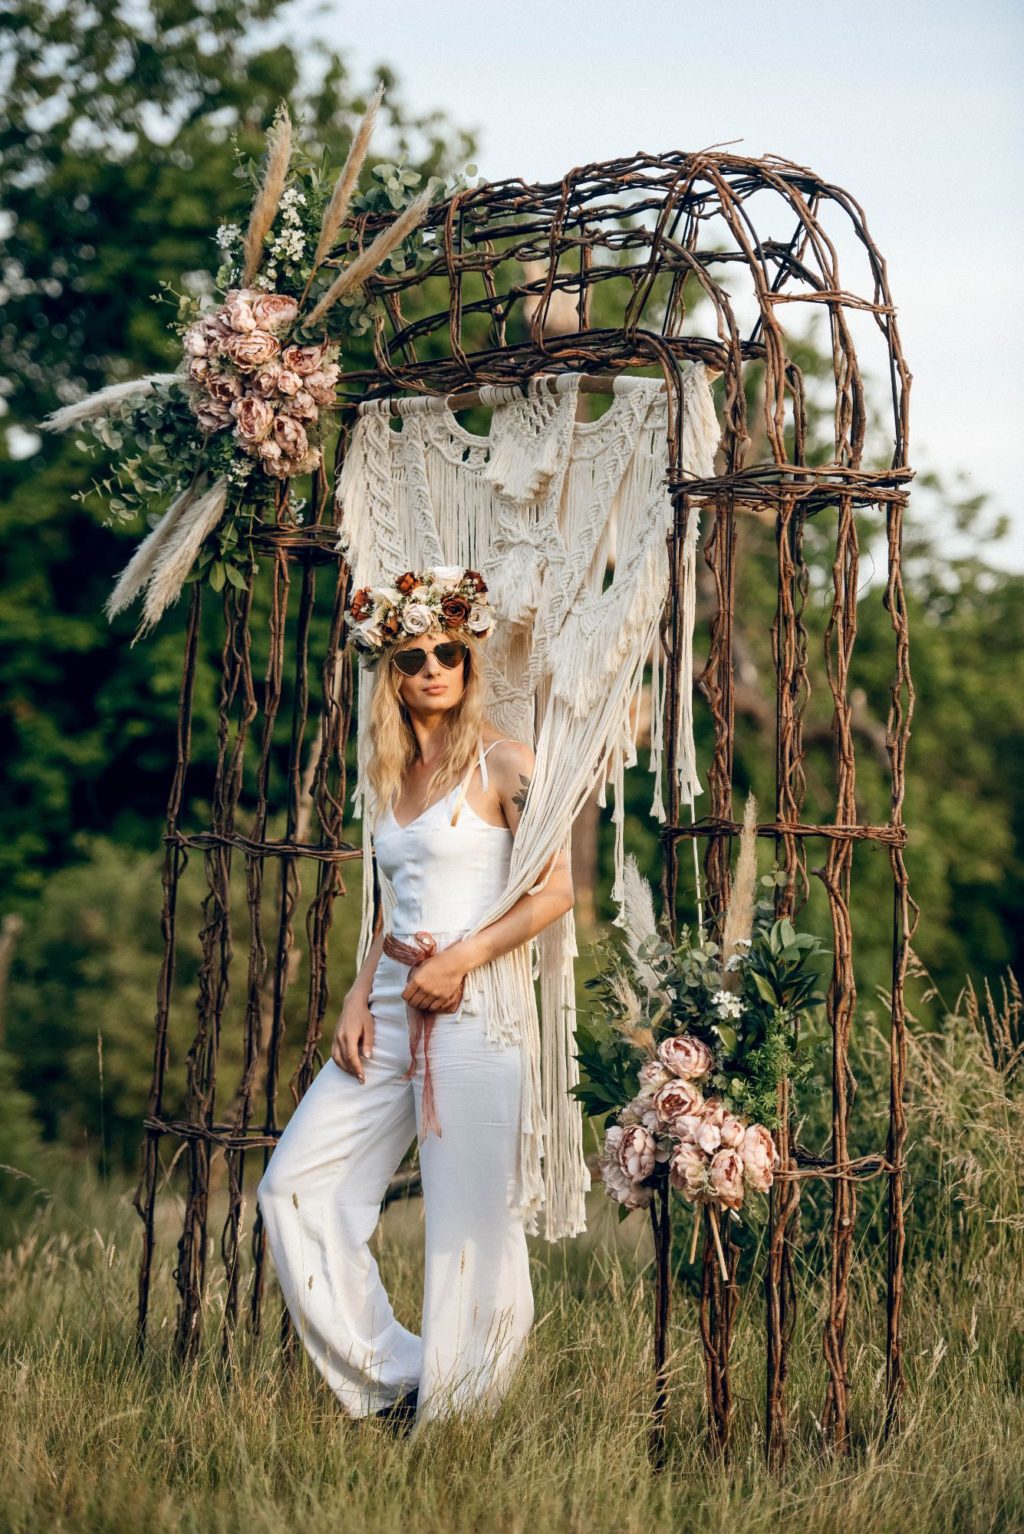 From Sunrise To Sunset; Five Alternative Bridal Looks For Your Wedding Day